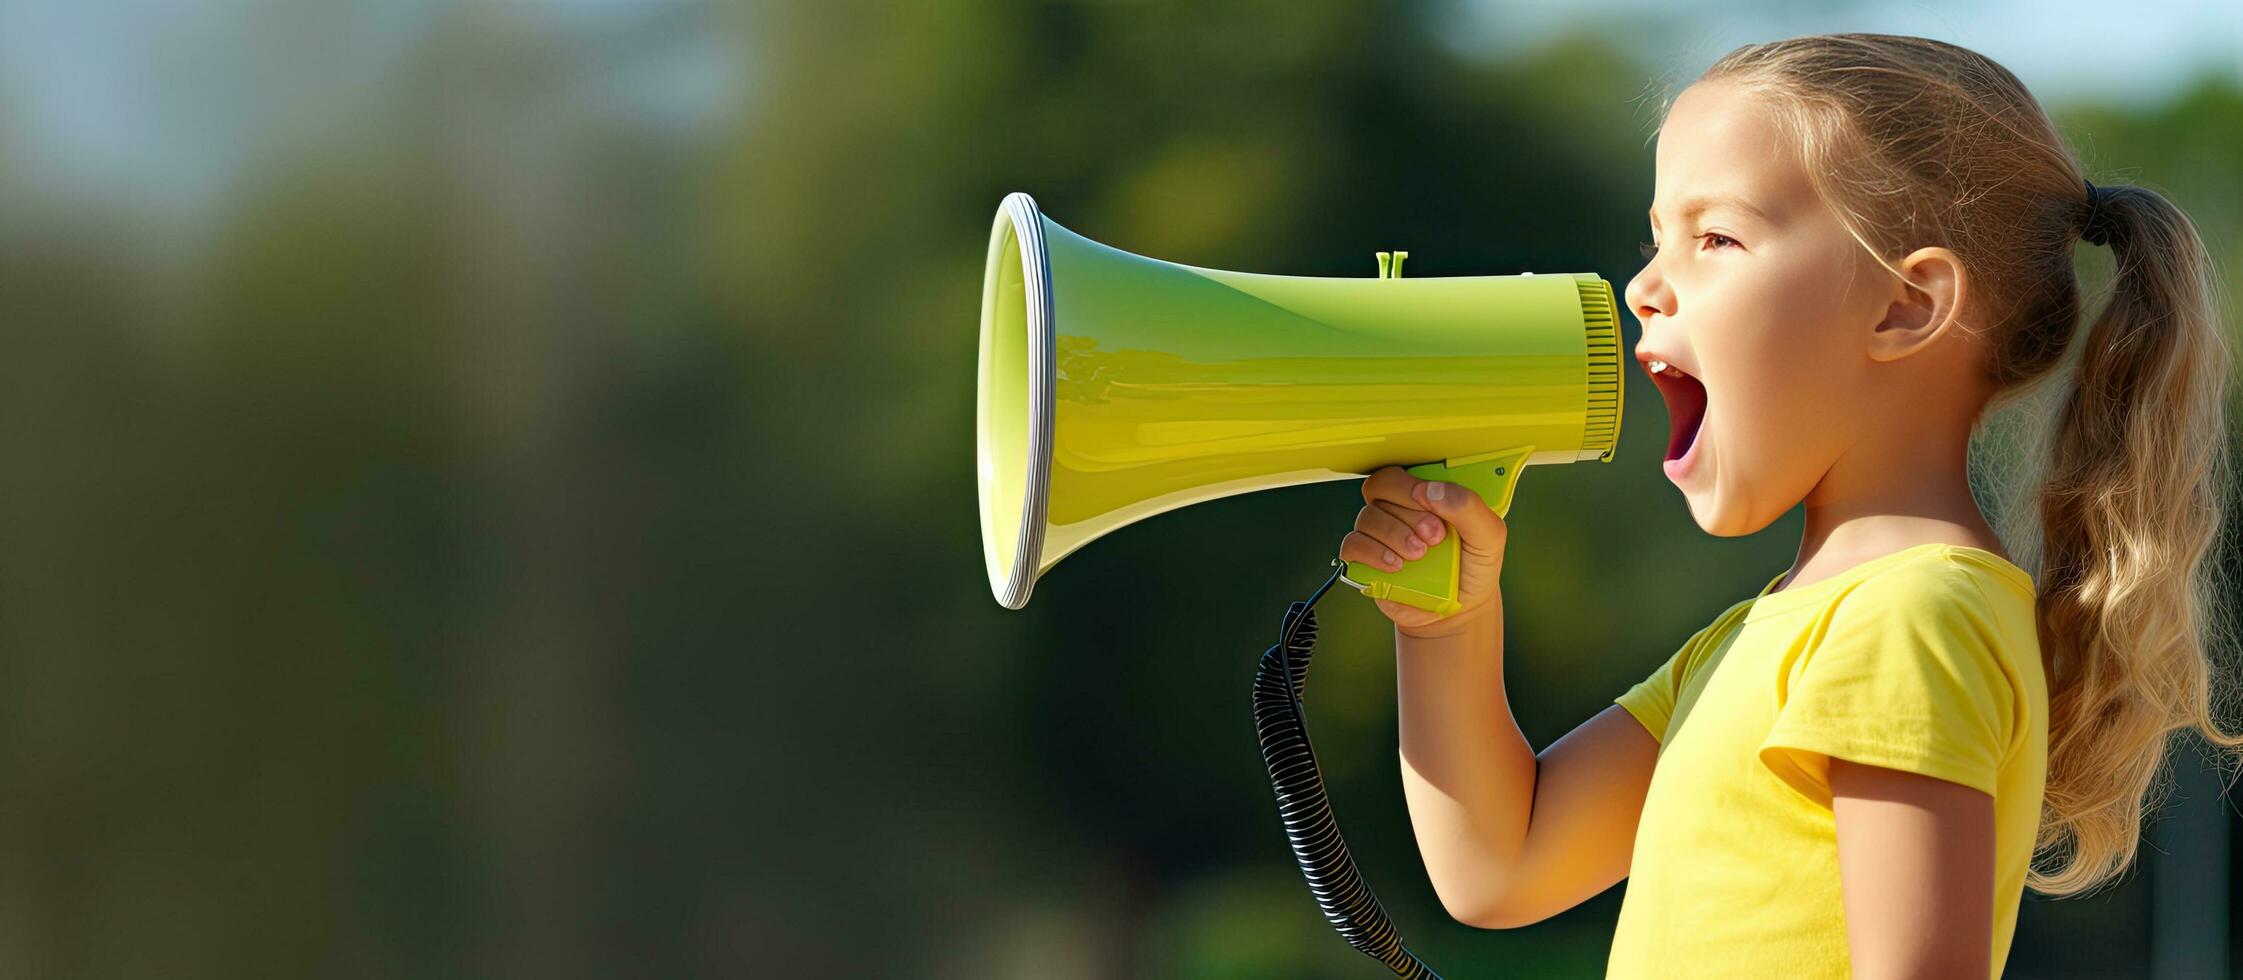 A girl with a green T shirt is using a megaphone on a yellow background photo